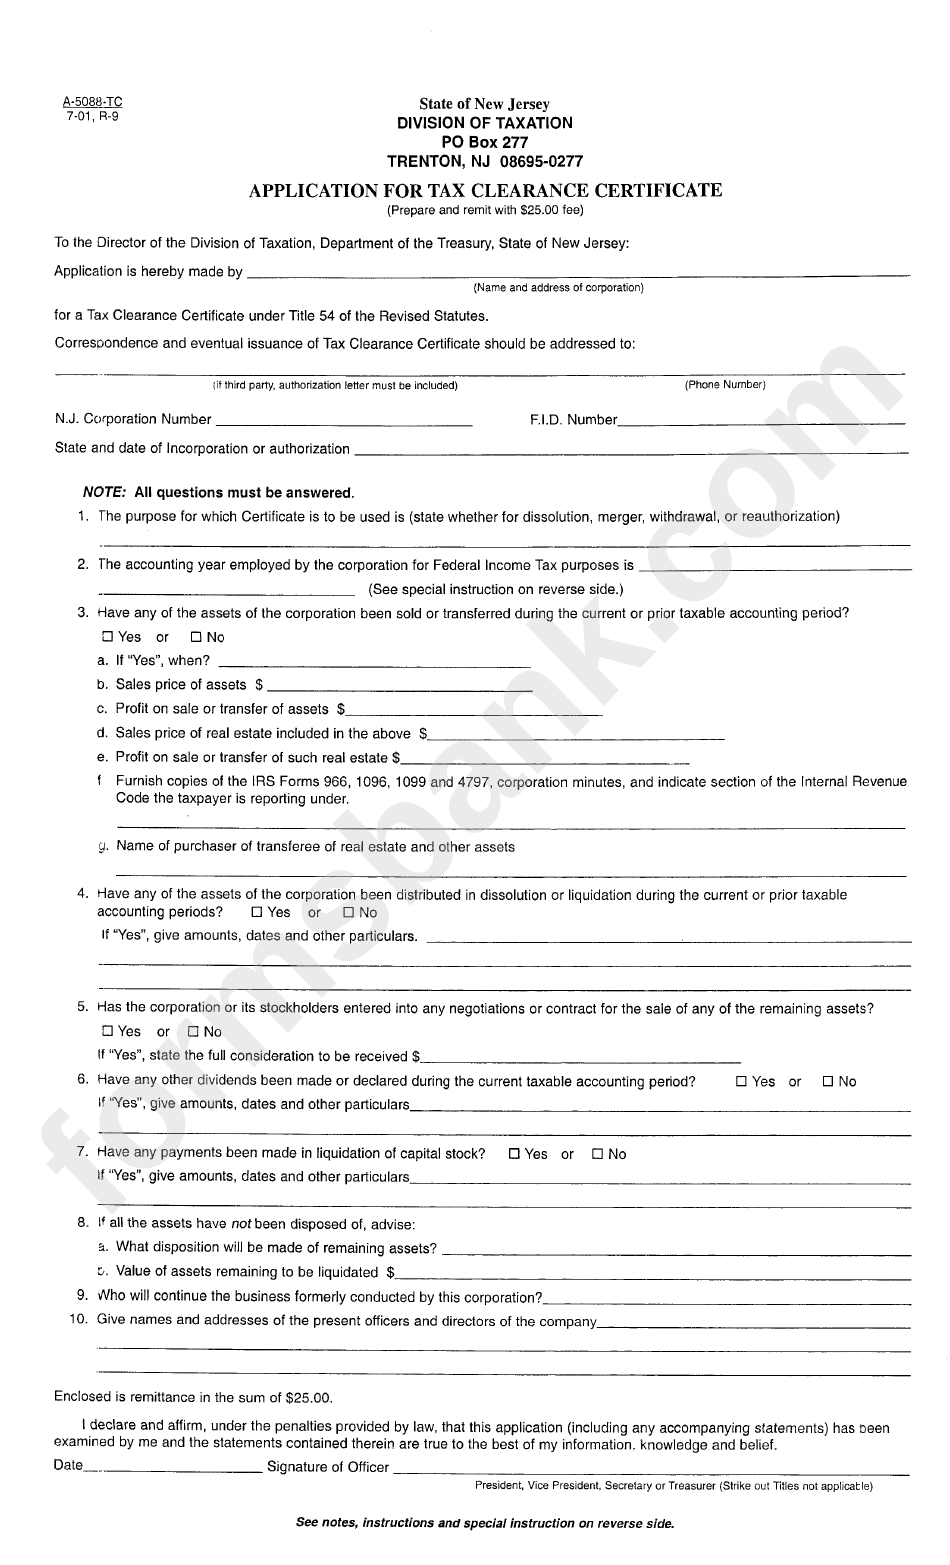 Form A-5088-Tc - Application For Tax Clearance Certificate - New Jersey